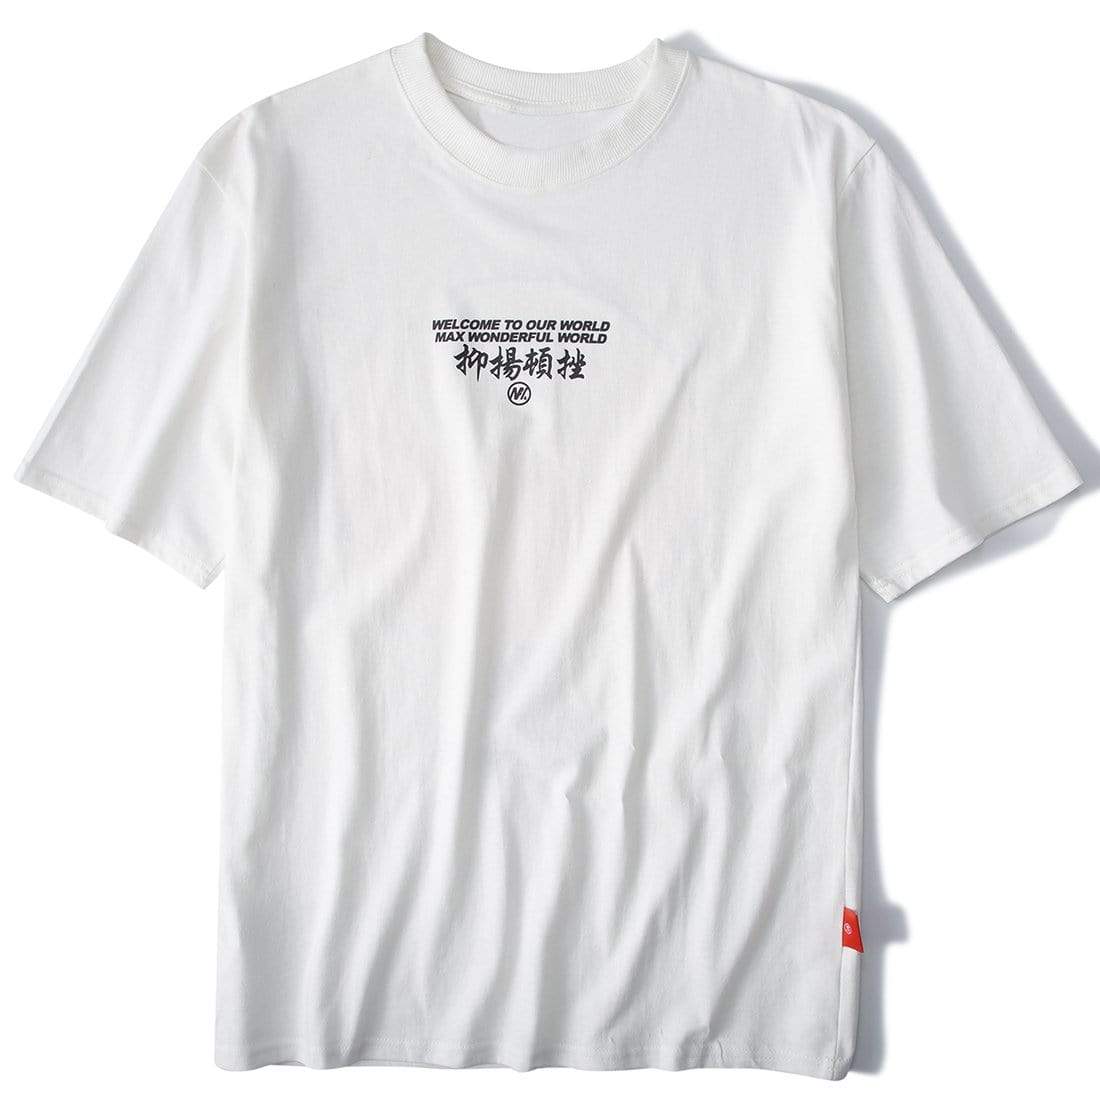 TO Ascent & Fall Tee